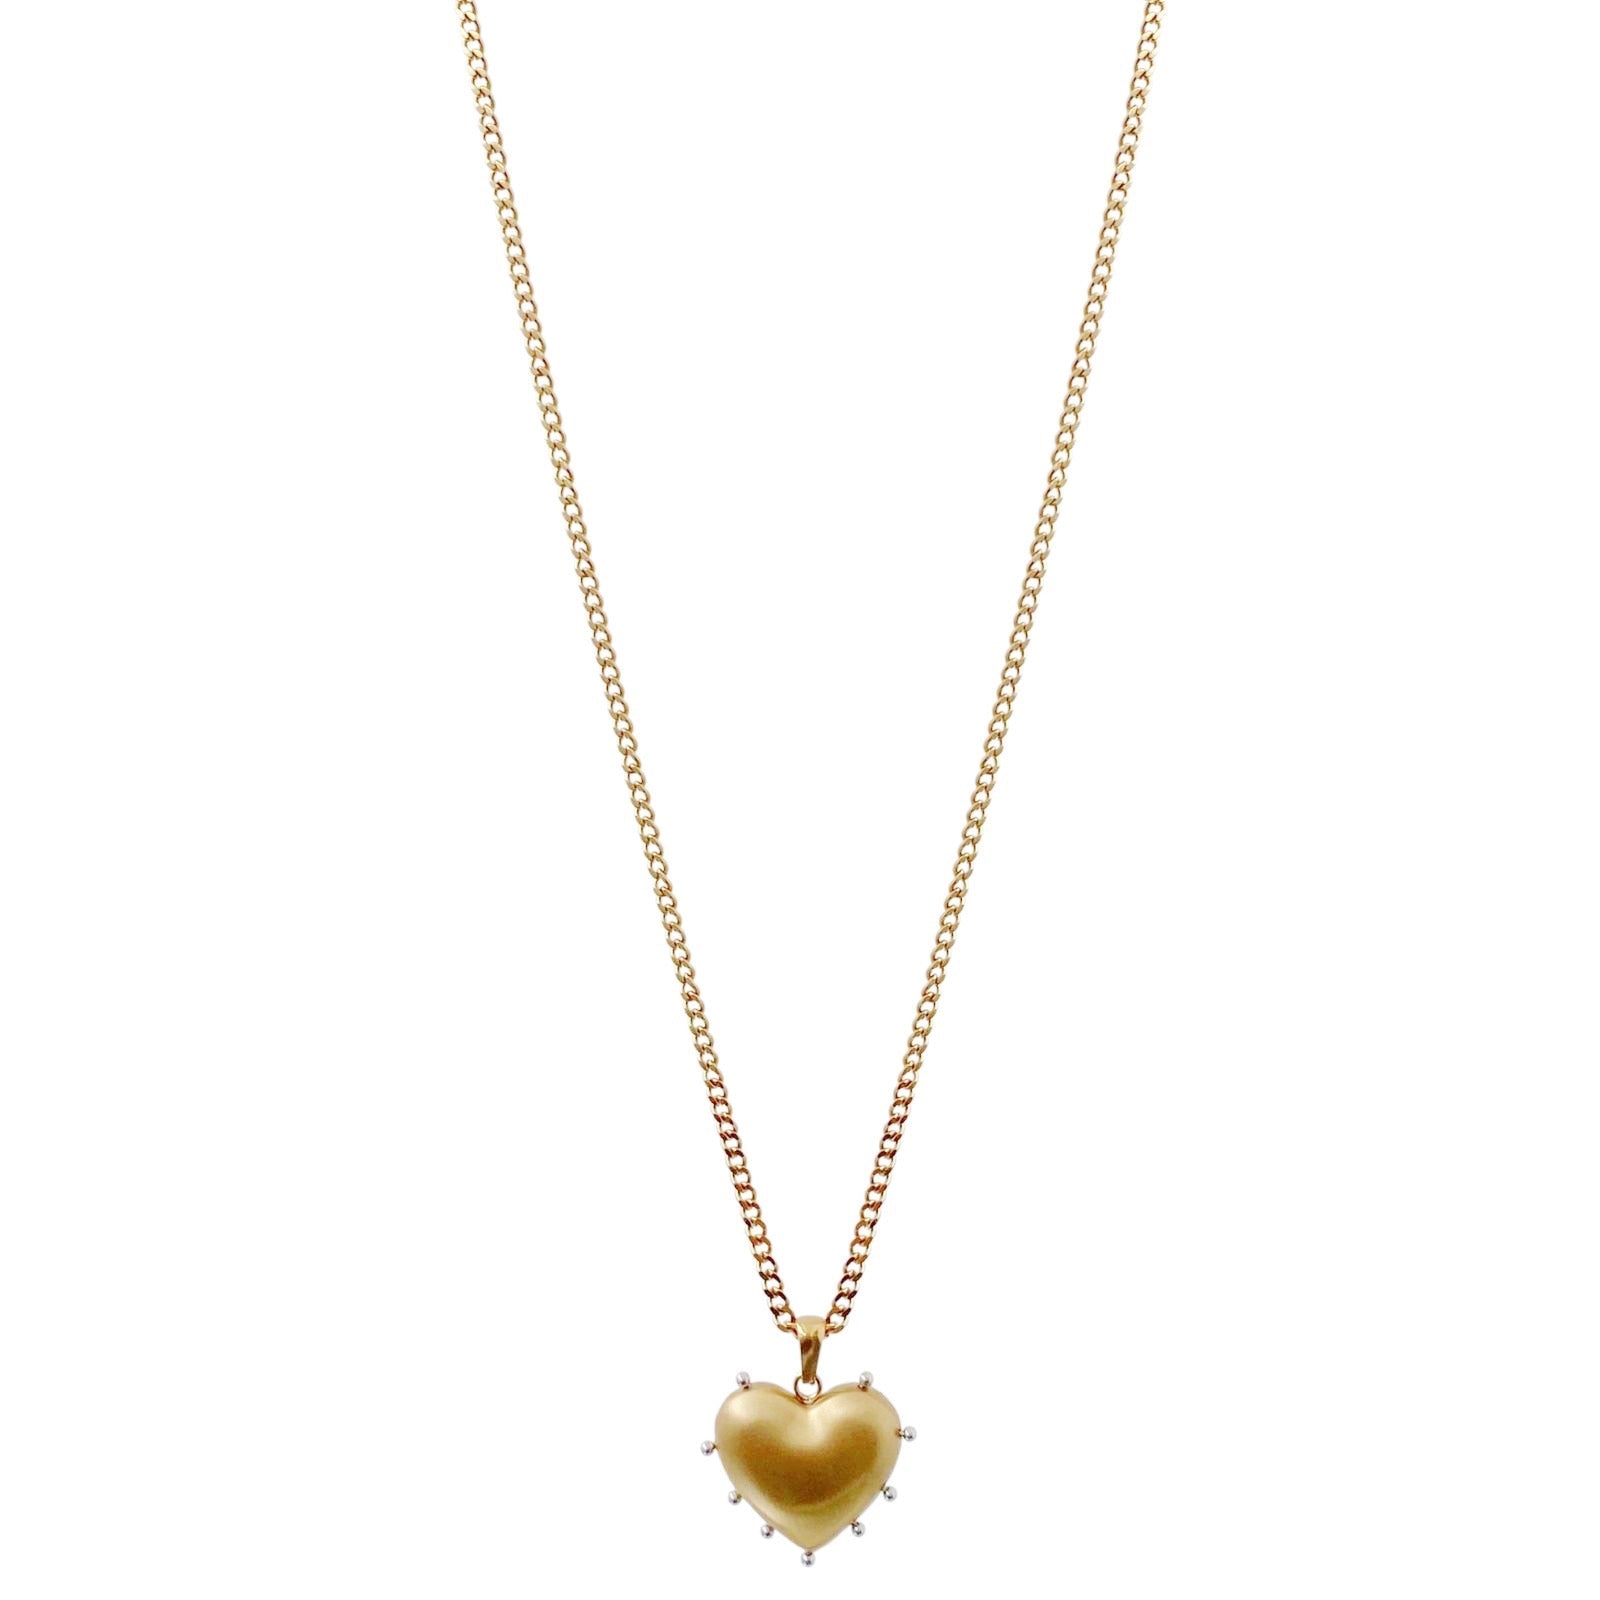 'CREATING' Long Chain Necklace with Heart